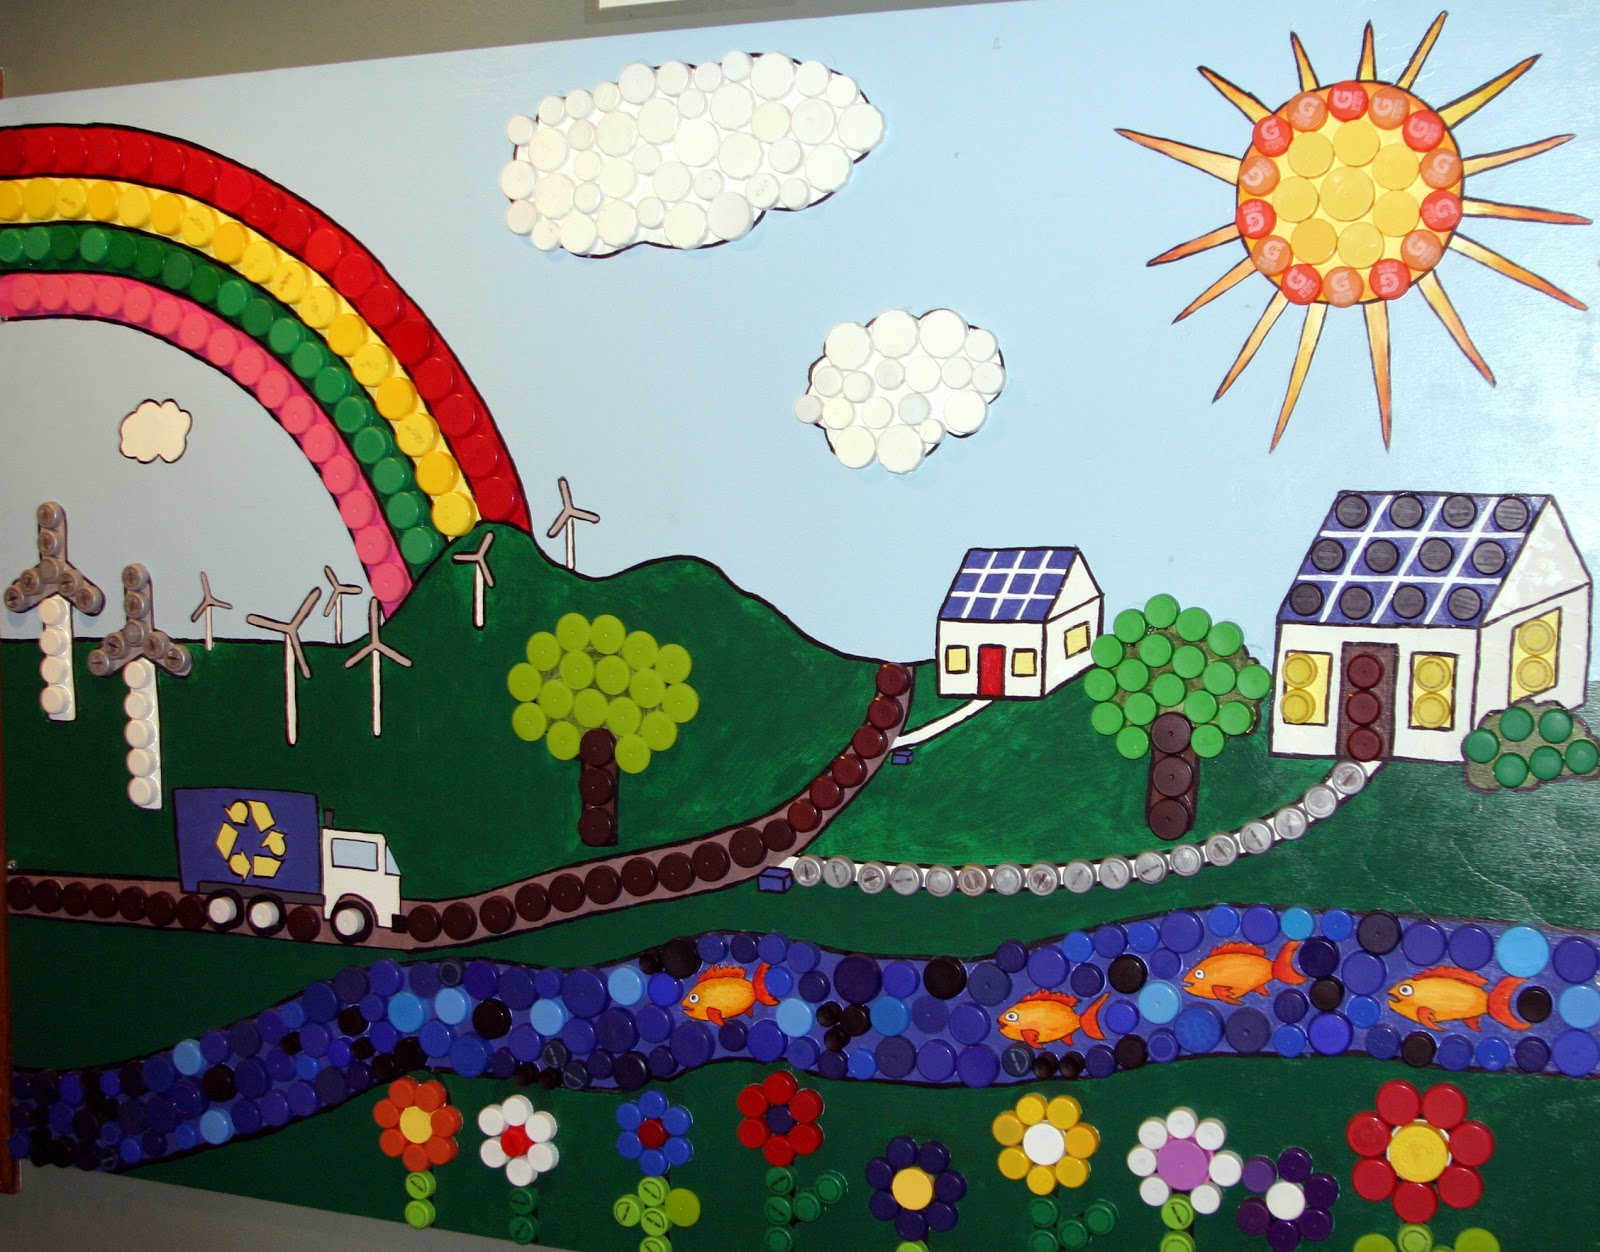 City of Rolla Missouri Bottle cap mural displayed at 